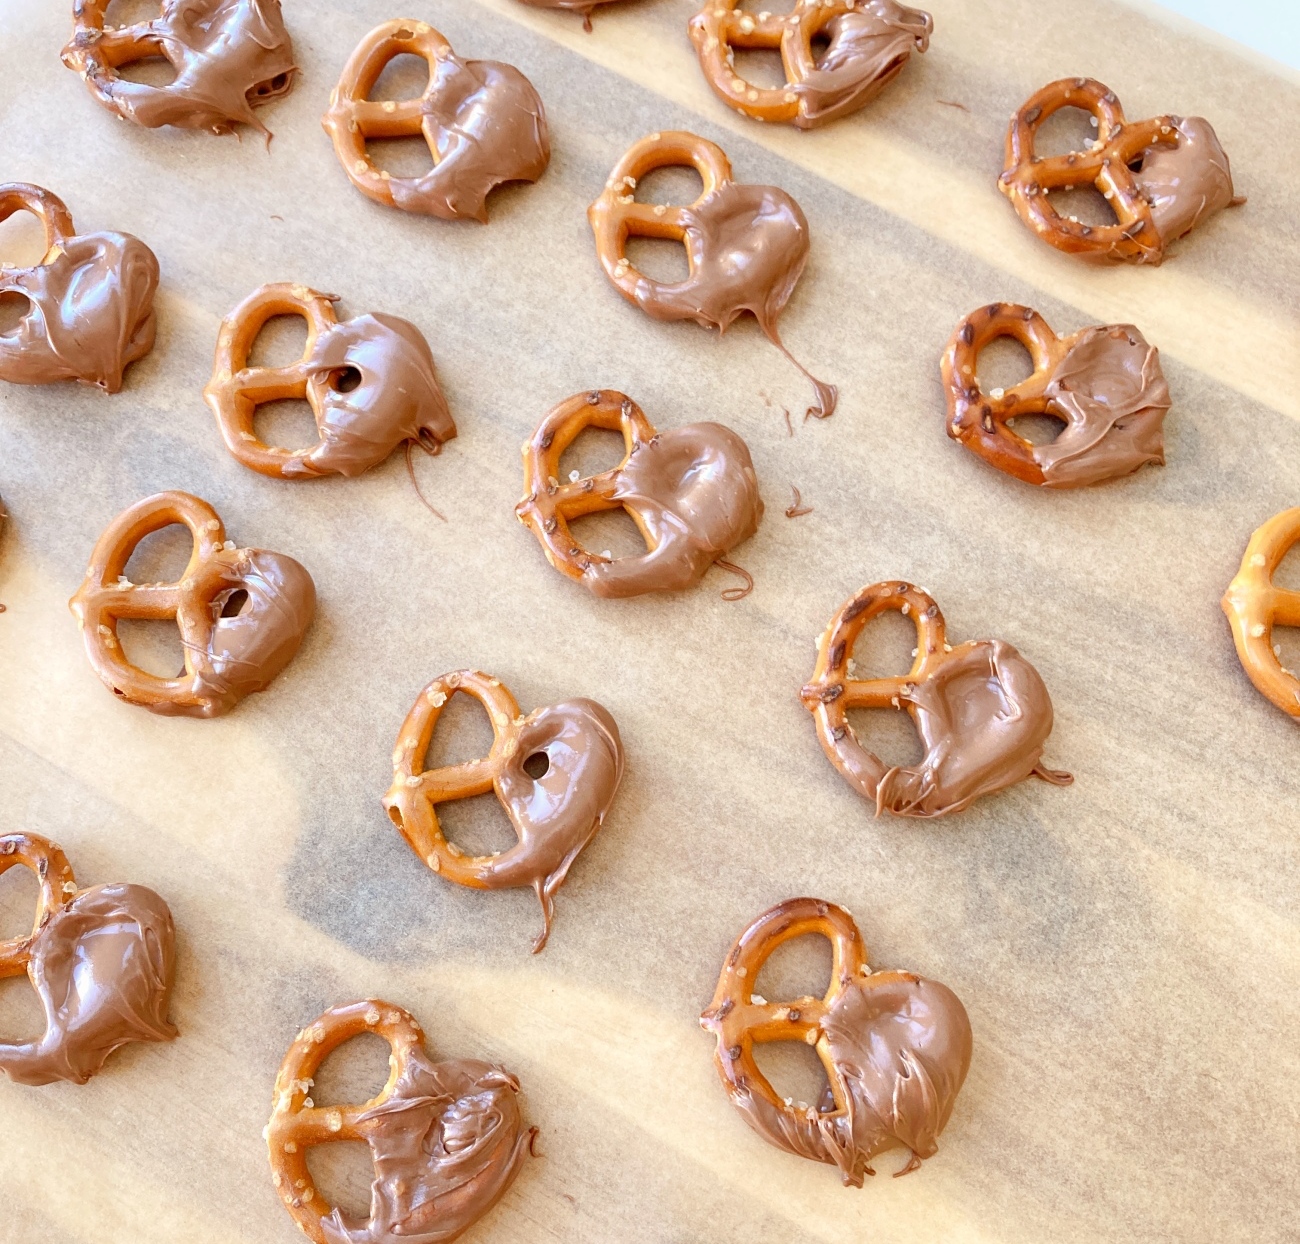 Melt chocolate chips in microwave using 30-second intervals. Dip half the pretzels into melted chocolate, either halfway up pretzels or part way to make a design in the finished cake. Lay on parchment paper lined sheet or on wire cooling rack for 20 minutes, then place in refrigerator to fully harden.